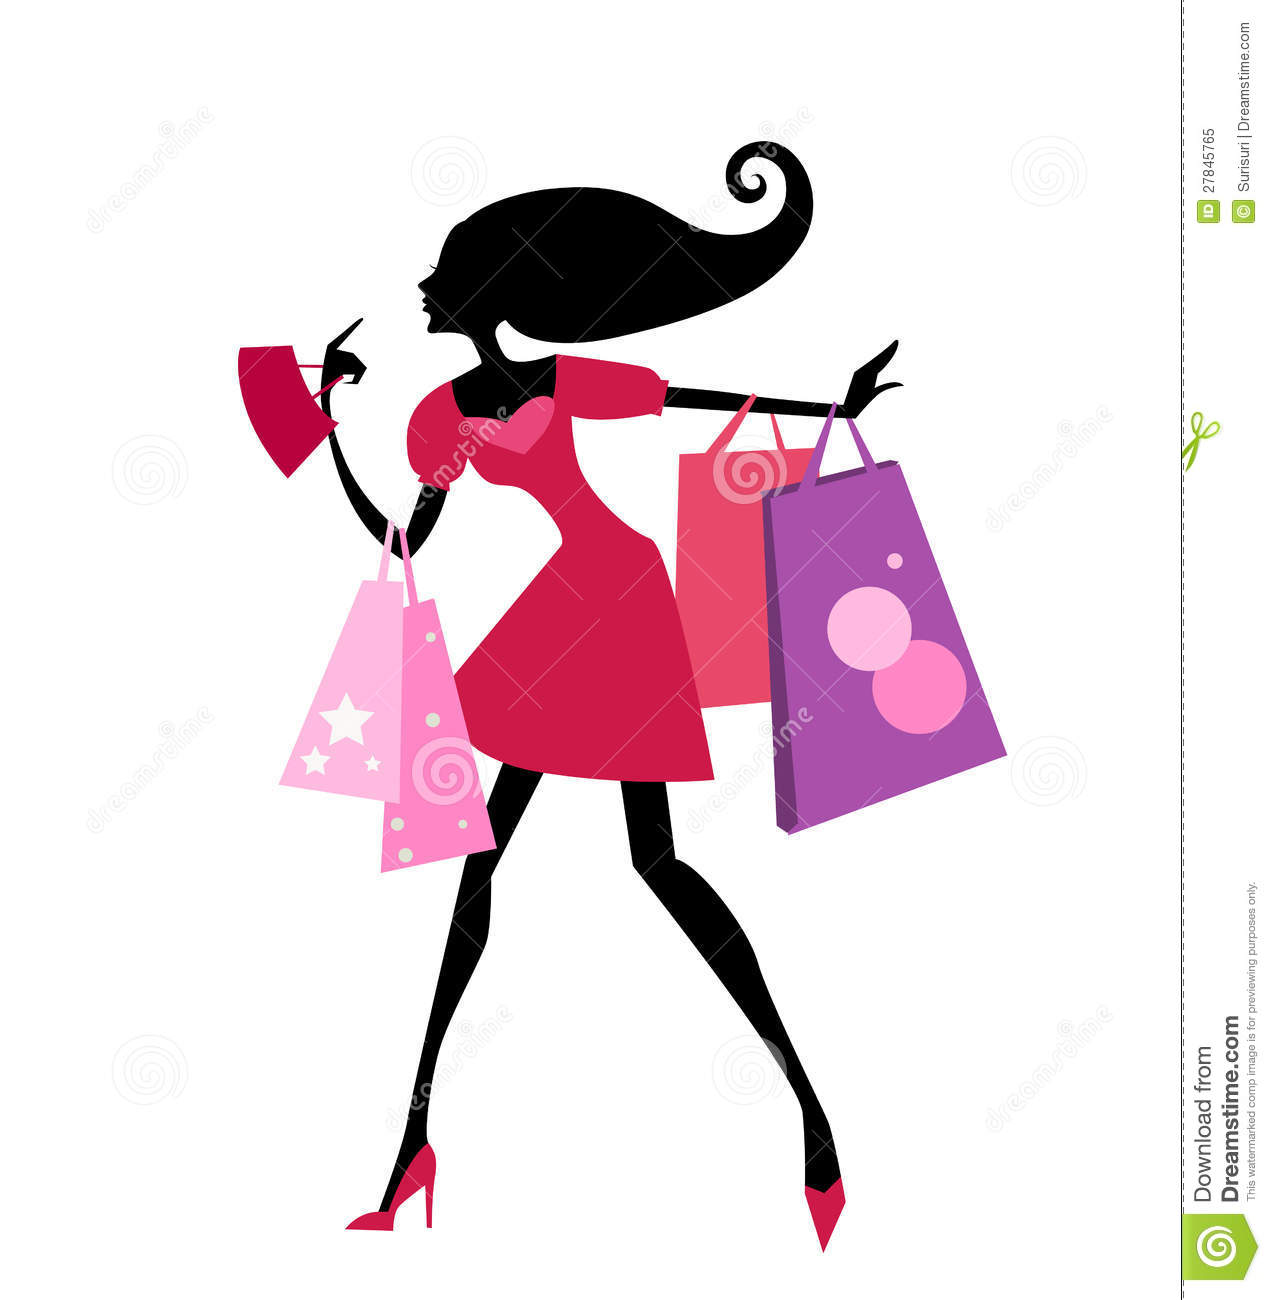 Pretty Girl With Shopping Bag Royalty Free Stock Photo   Image